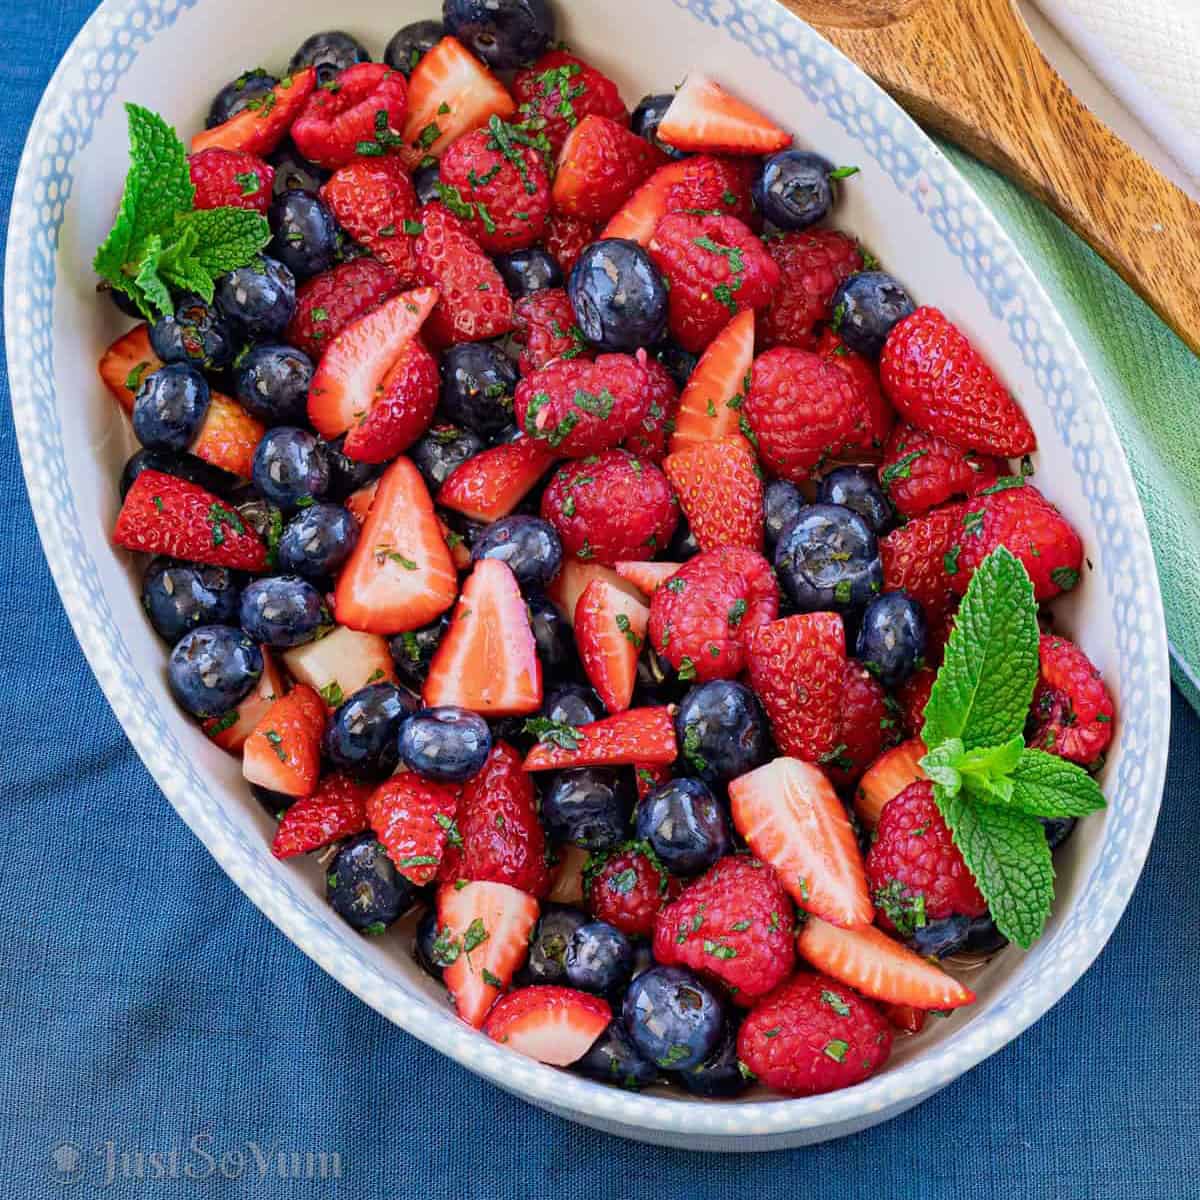 featured-image-for-berry-fruit-salad-recipe